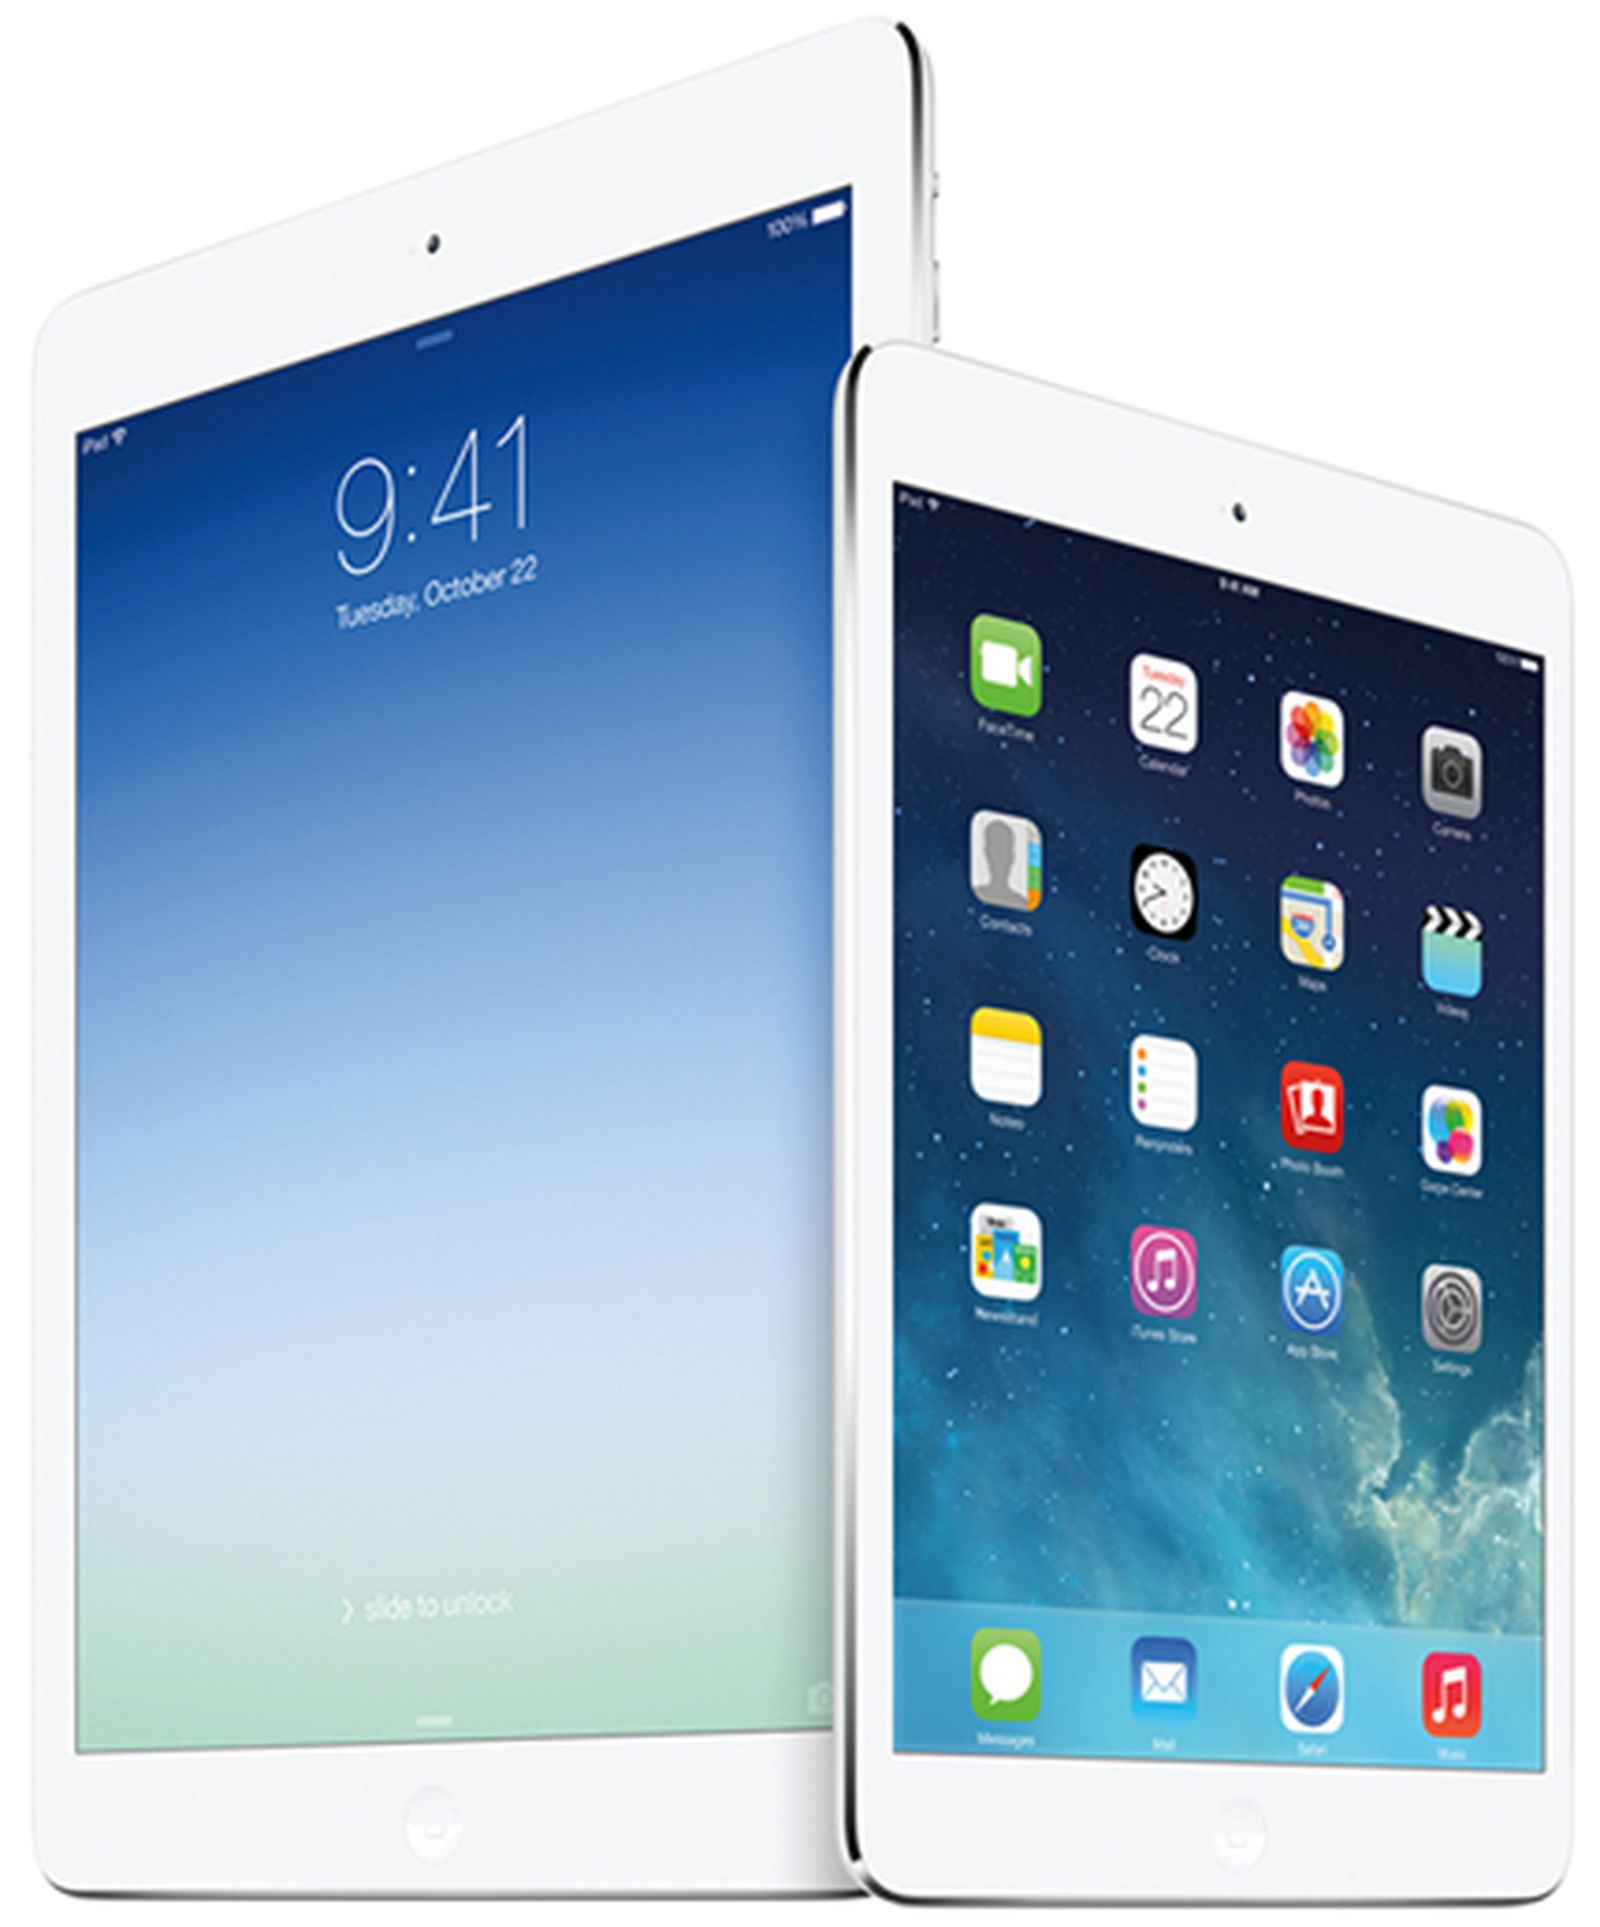 Buyer's Guide Deals: Discounts on the Original iPad Air and iPad